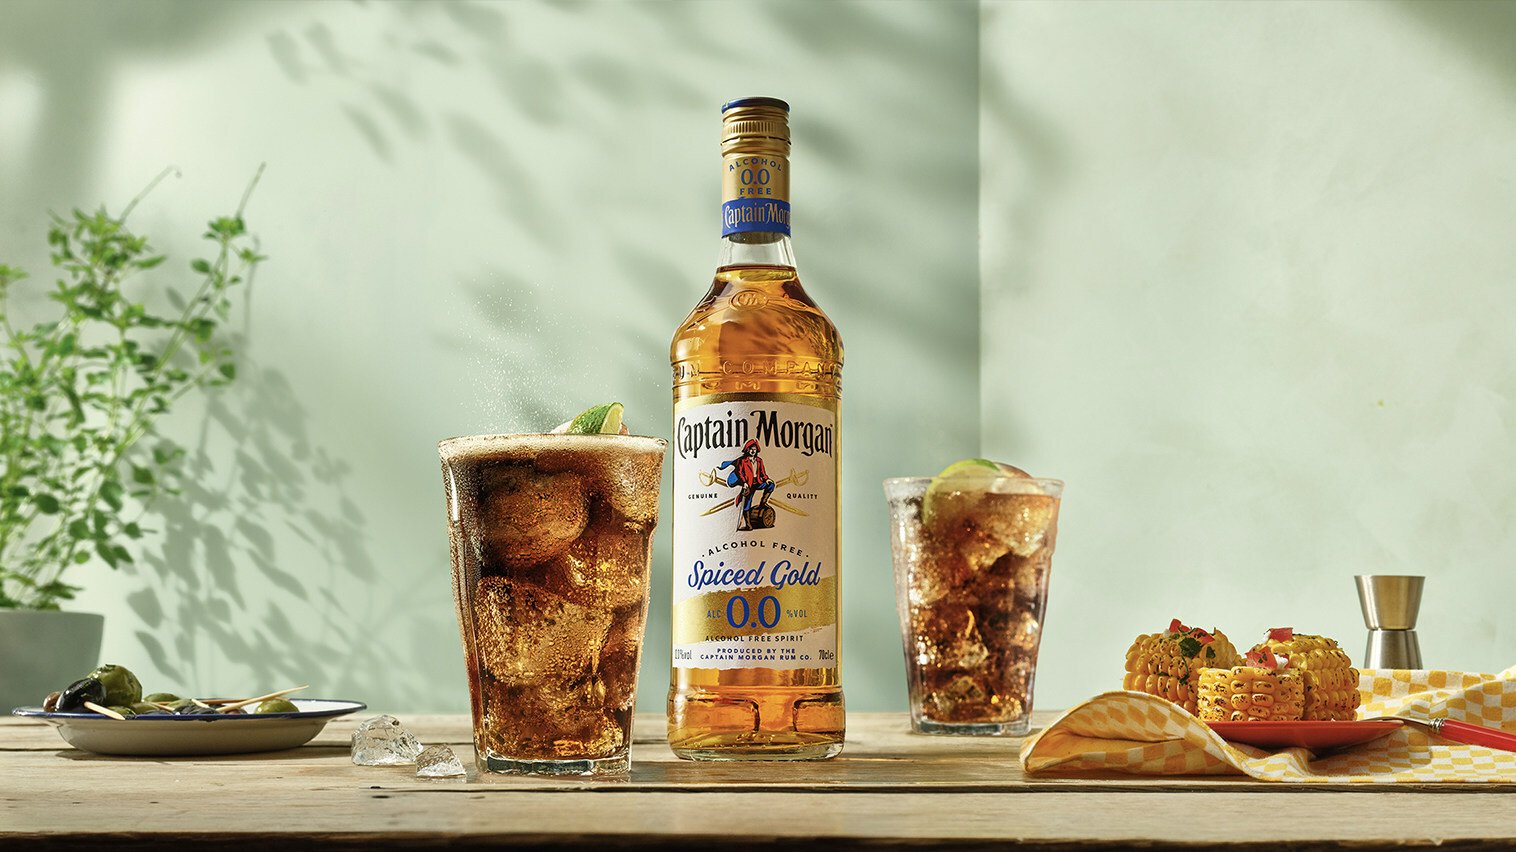 beverage water to sparkling alcohol-free rum launches: New from